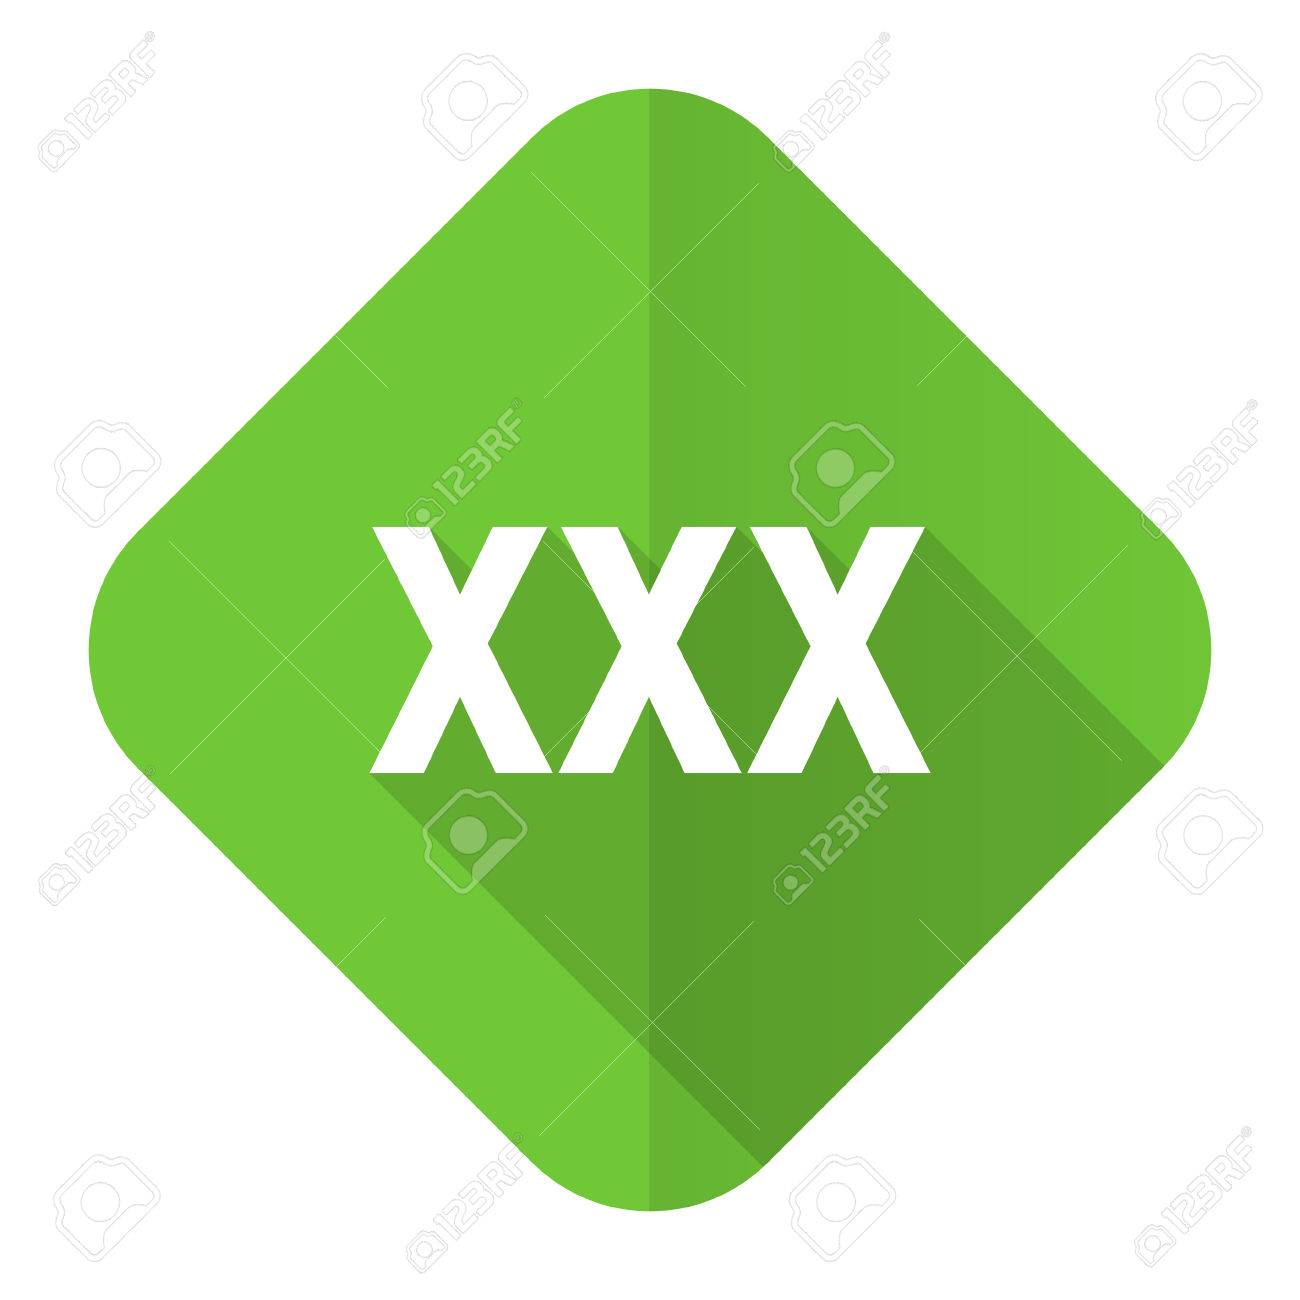 Xxx Flat Icon Porn Sign Stock Photo Picture And Royalty Free